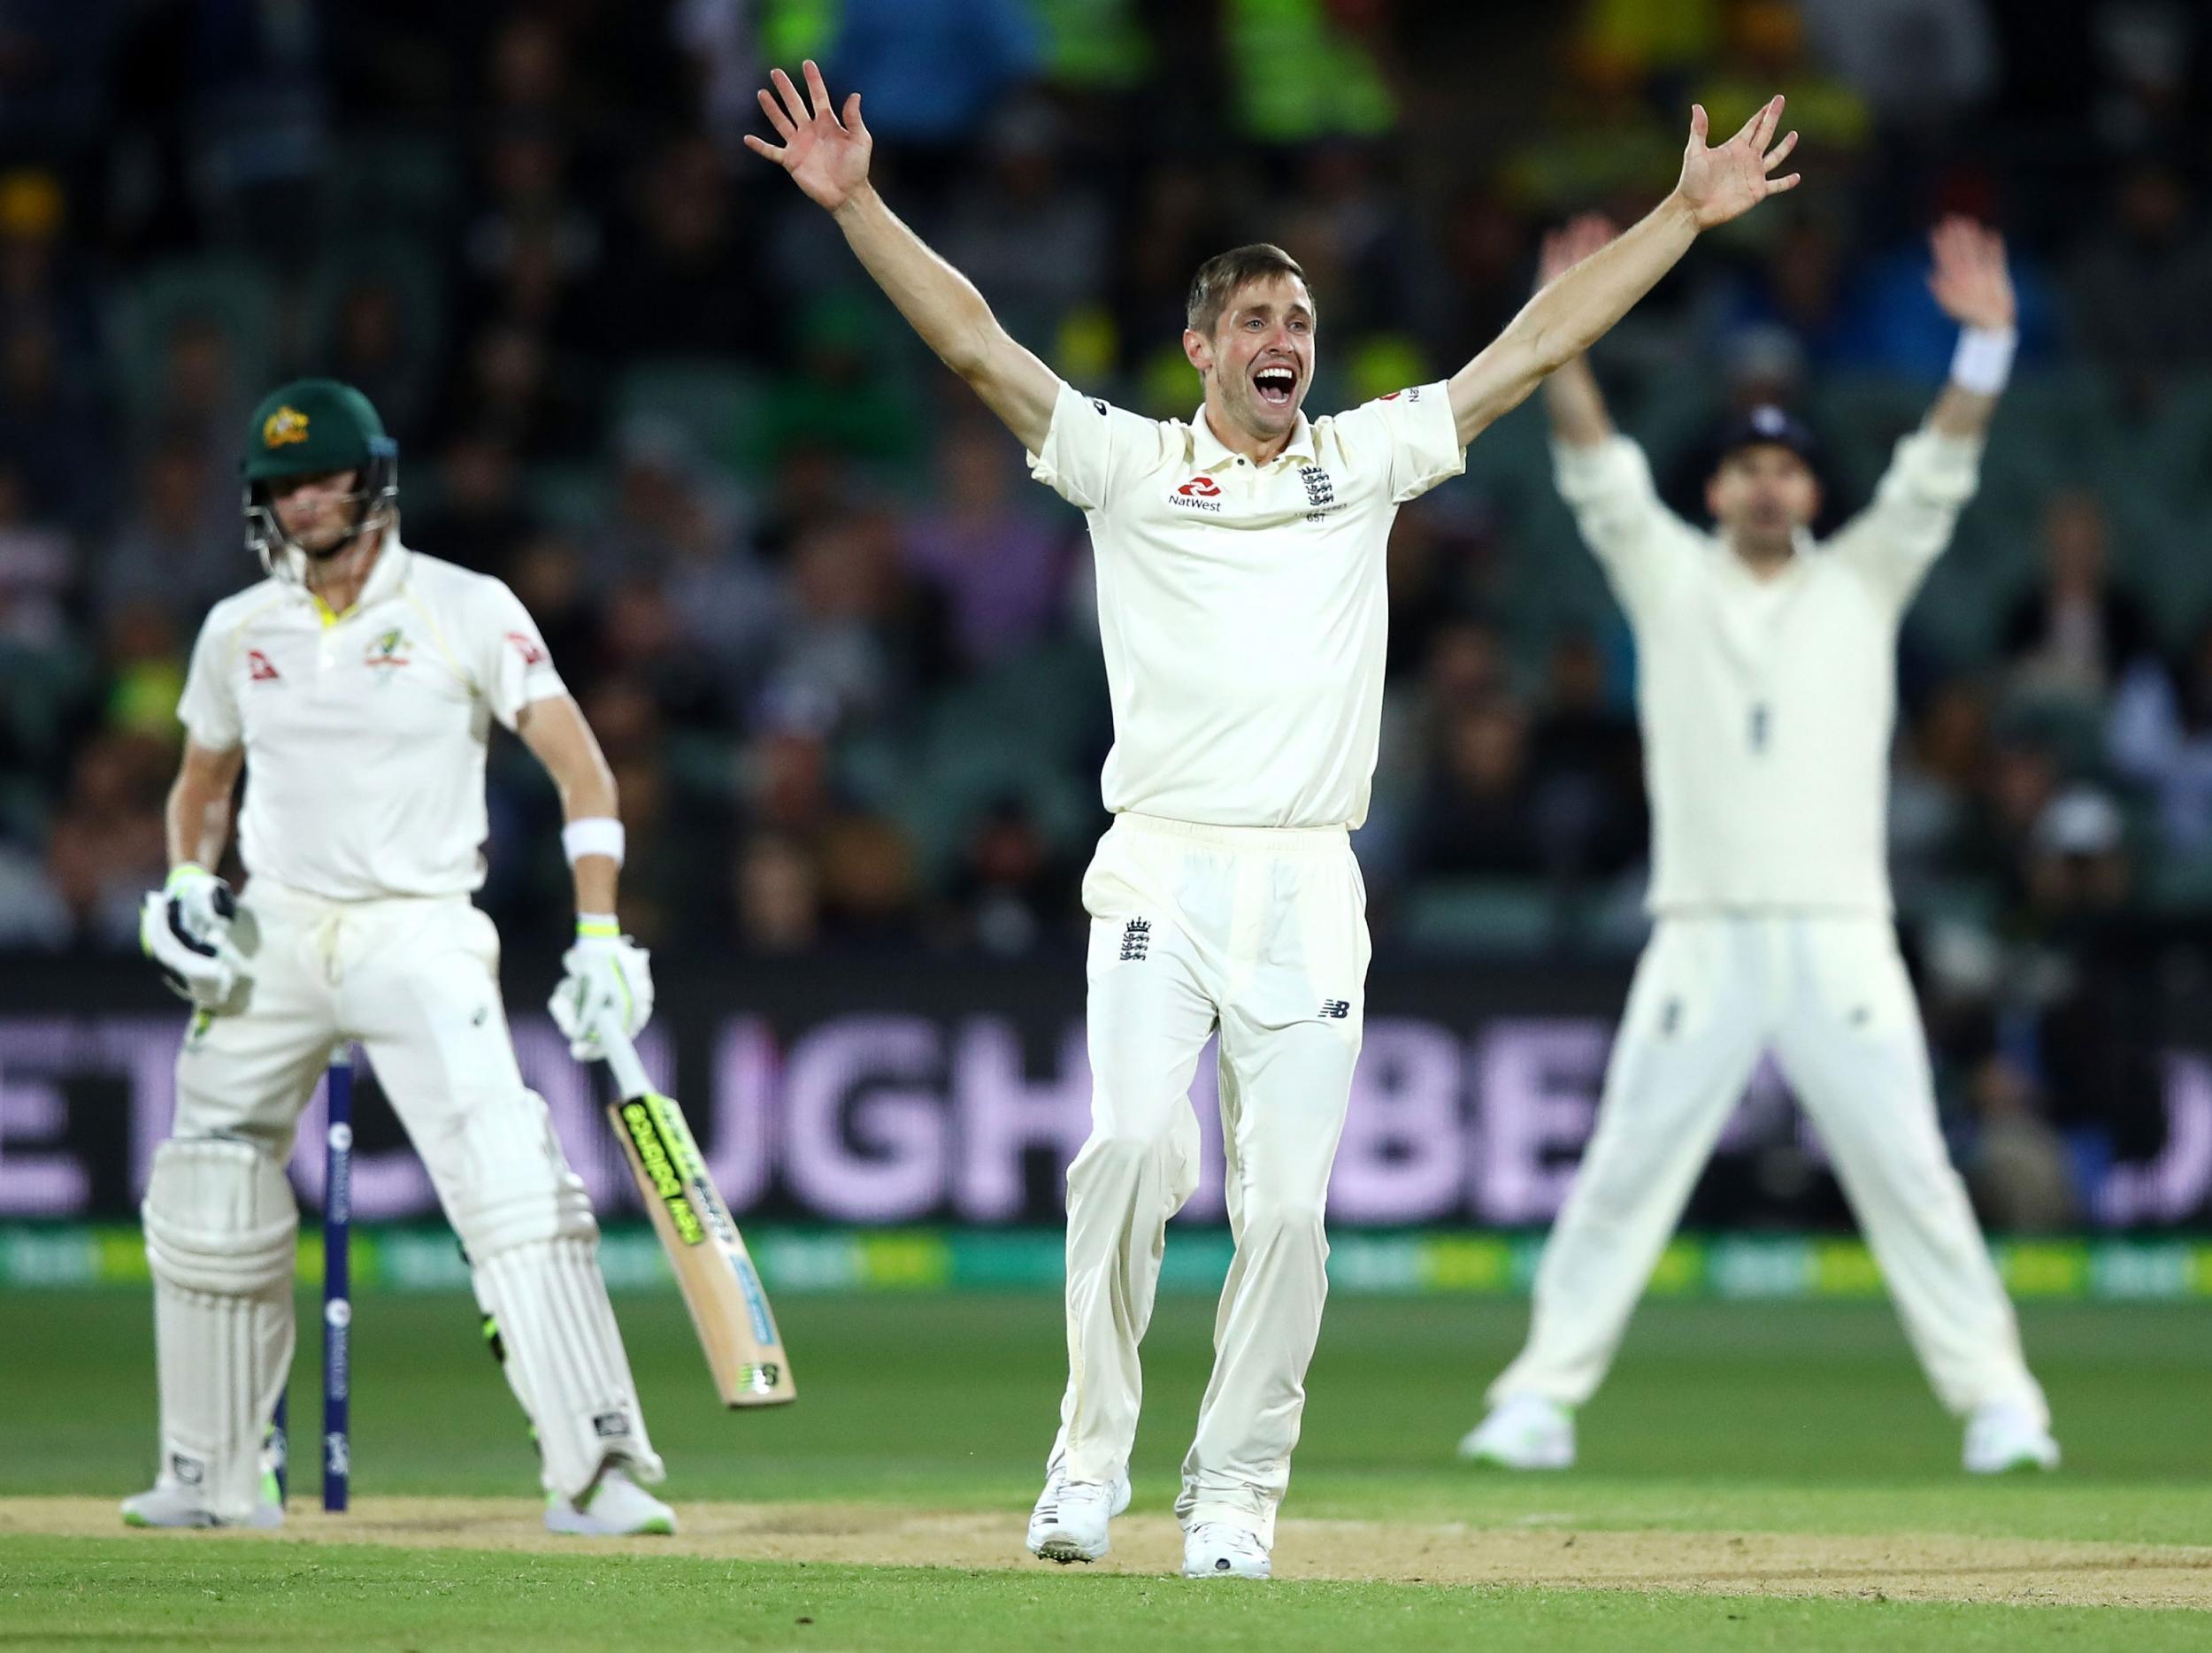 England roared back under the lights but remain in a dark position in Adelaide